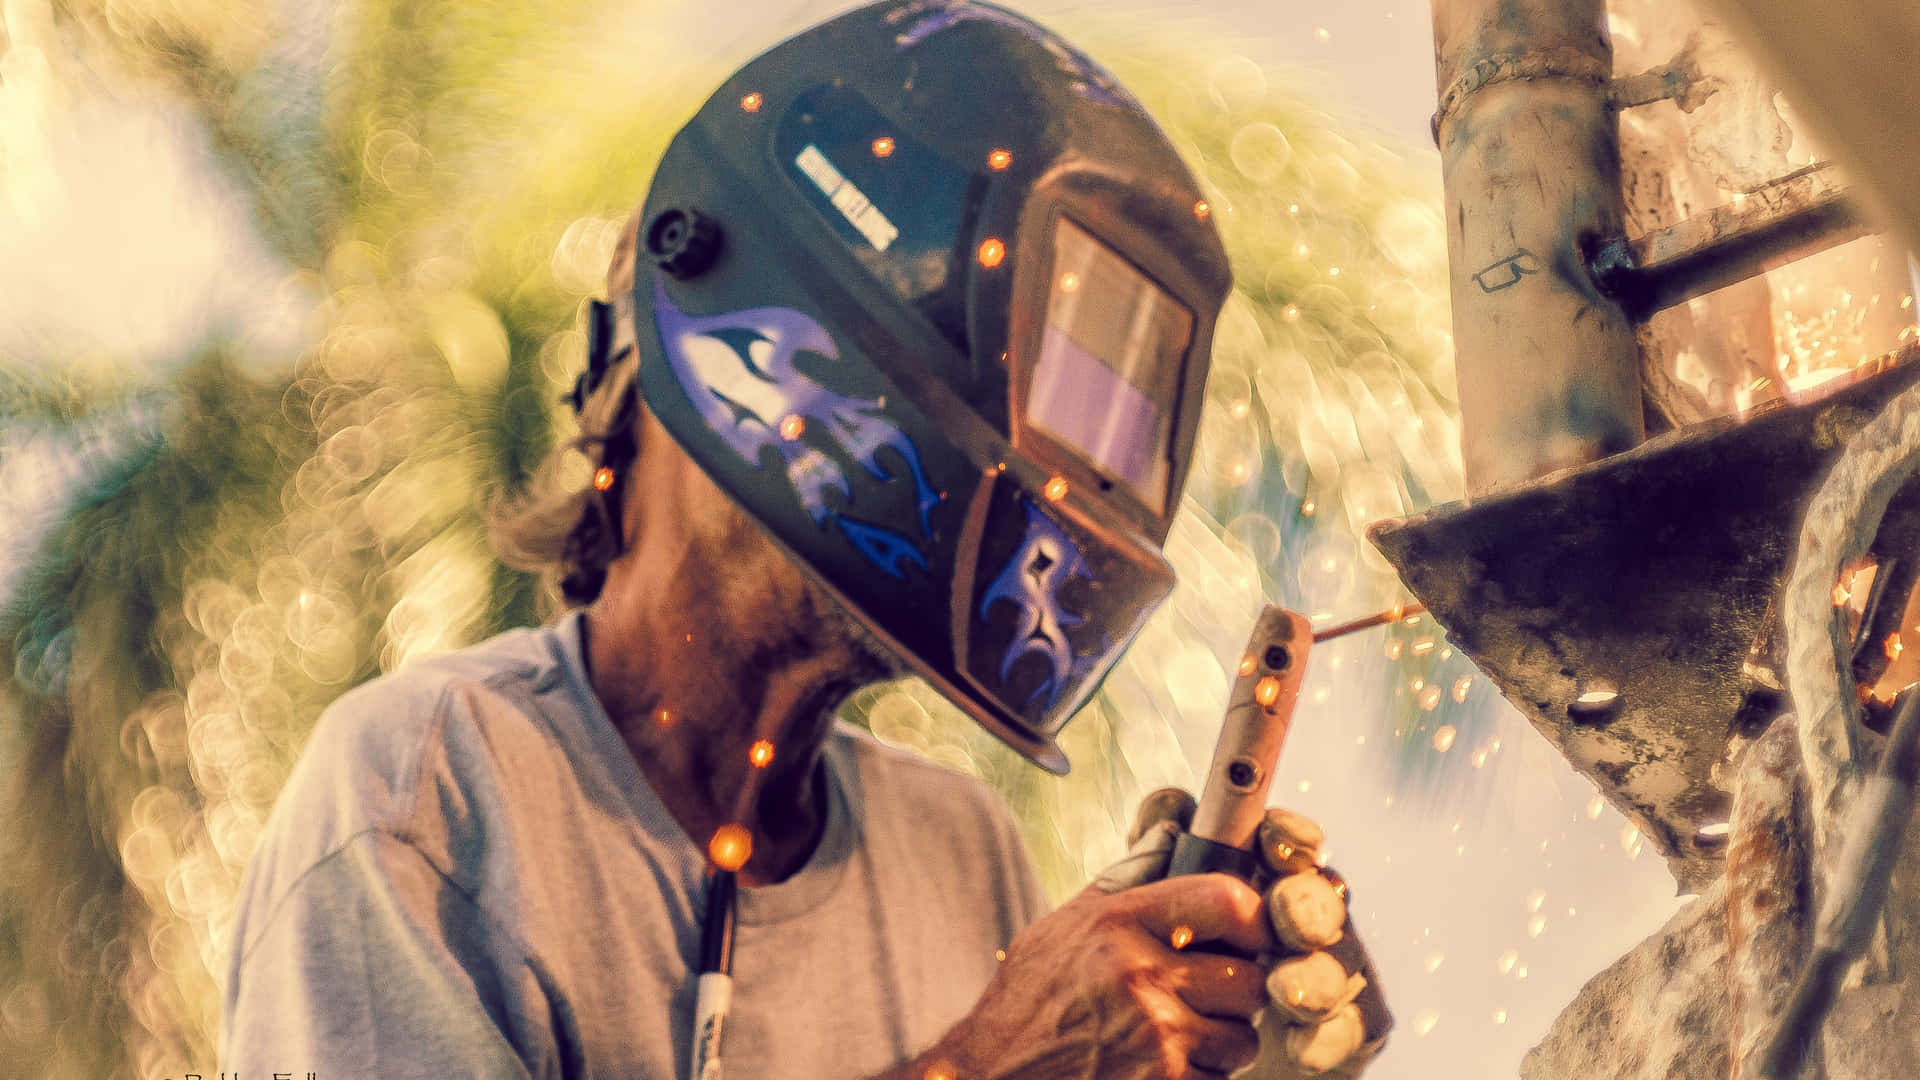 A Man Welding With A Helmet On A Piece Of Metal